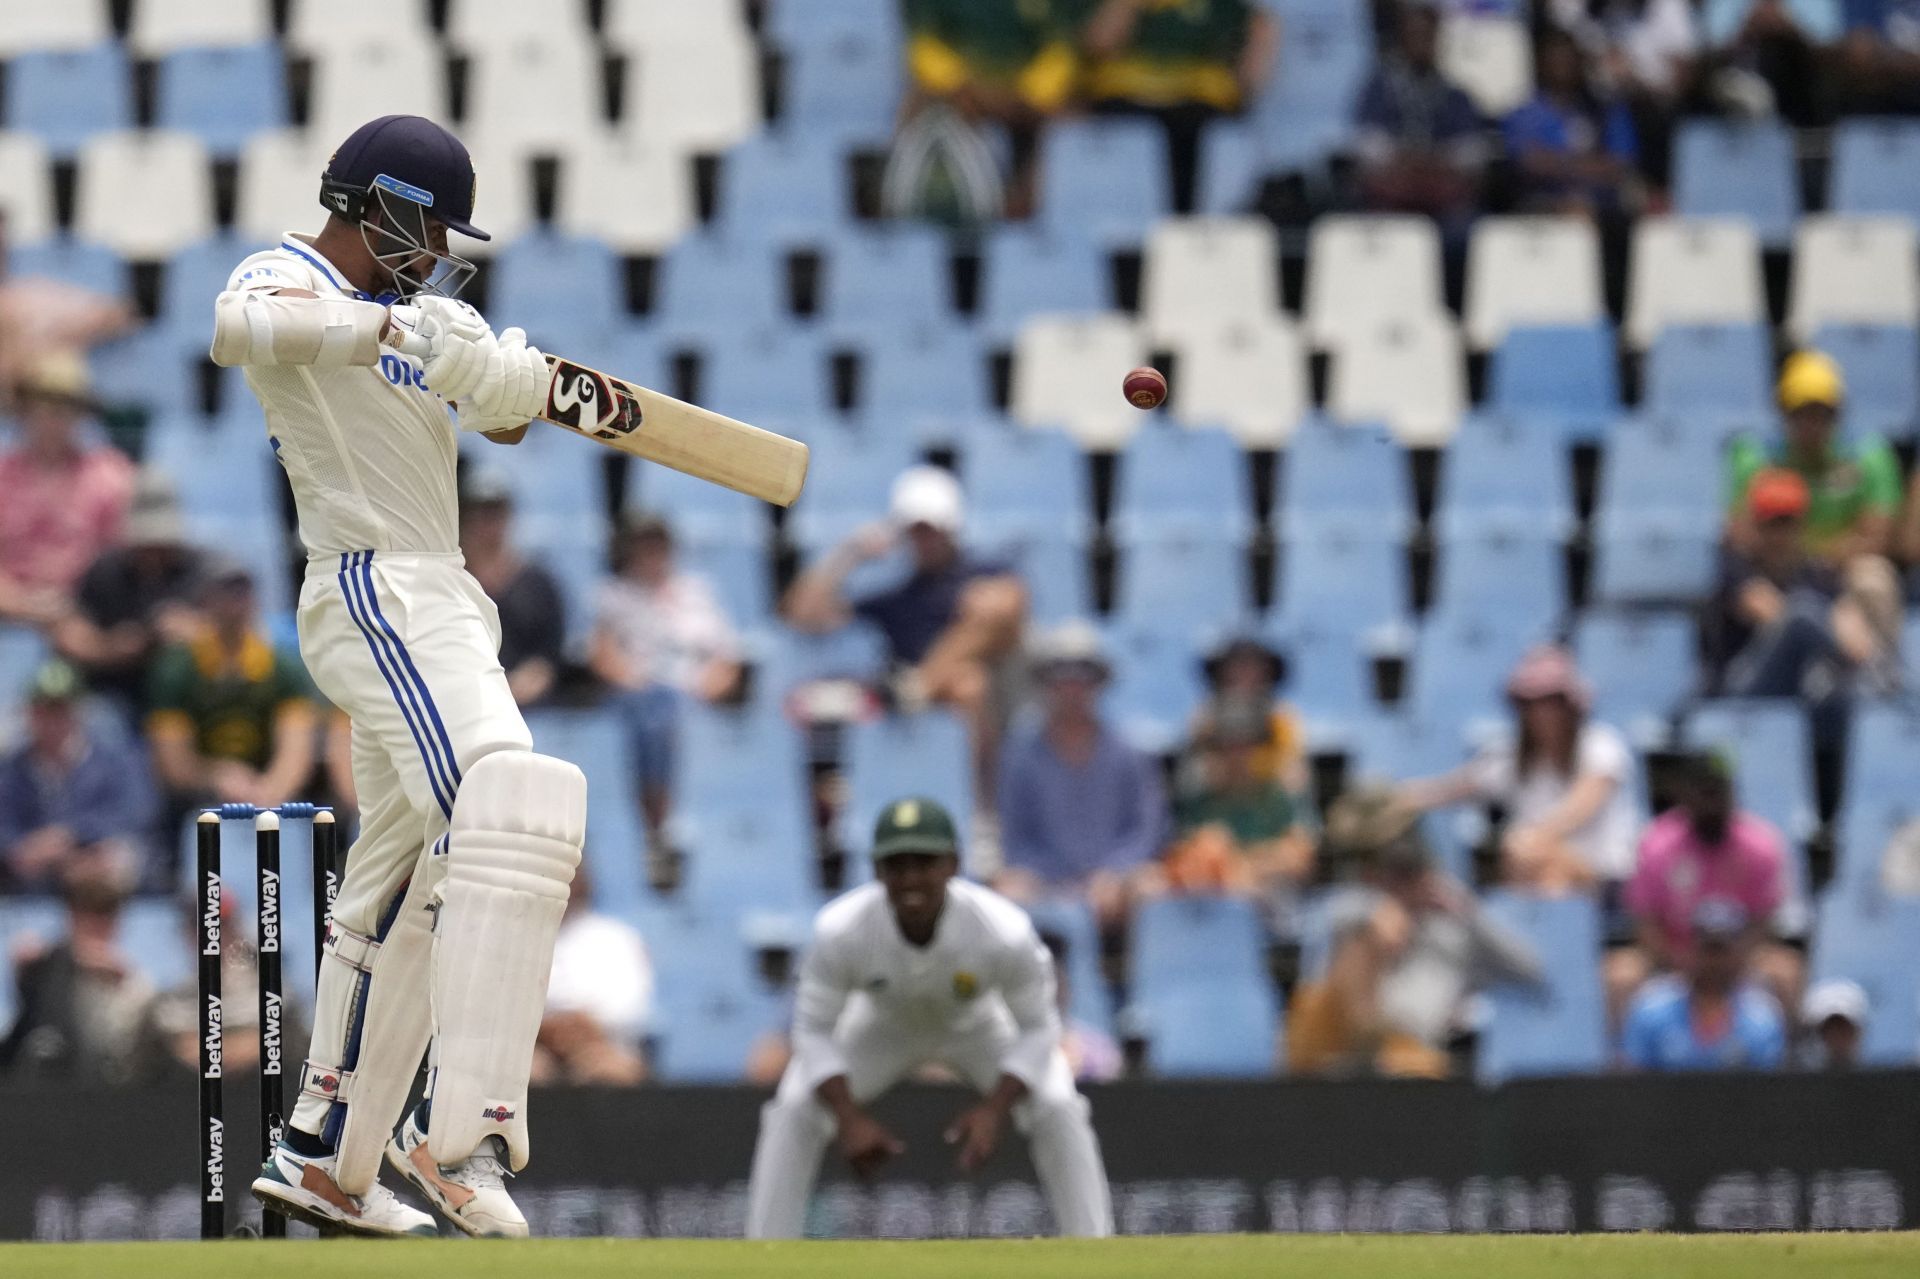 The Indian batters were found wanting against pace and bounce. [P/C: AP]